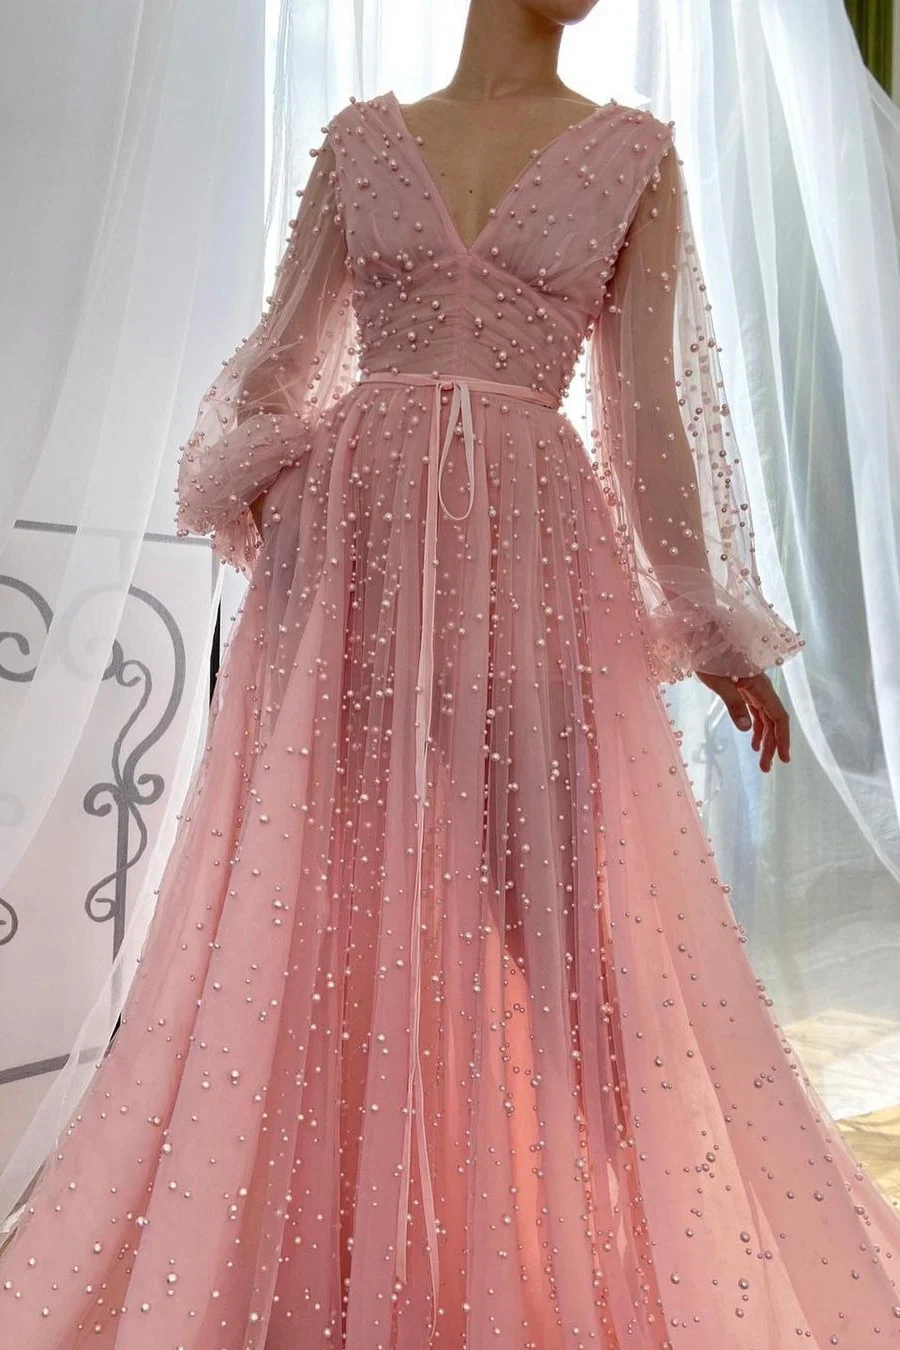 Daisda Pink Plunging Neck Long Puffy Sleeves Evening Dress With Pearl Beaded Tulle 